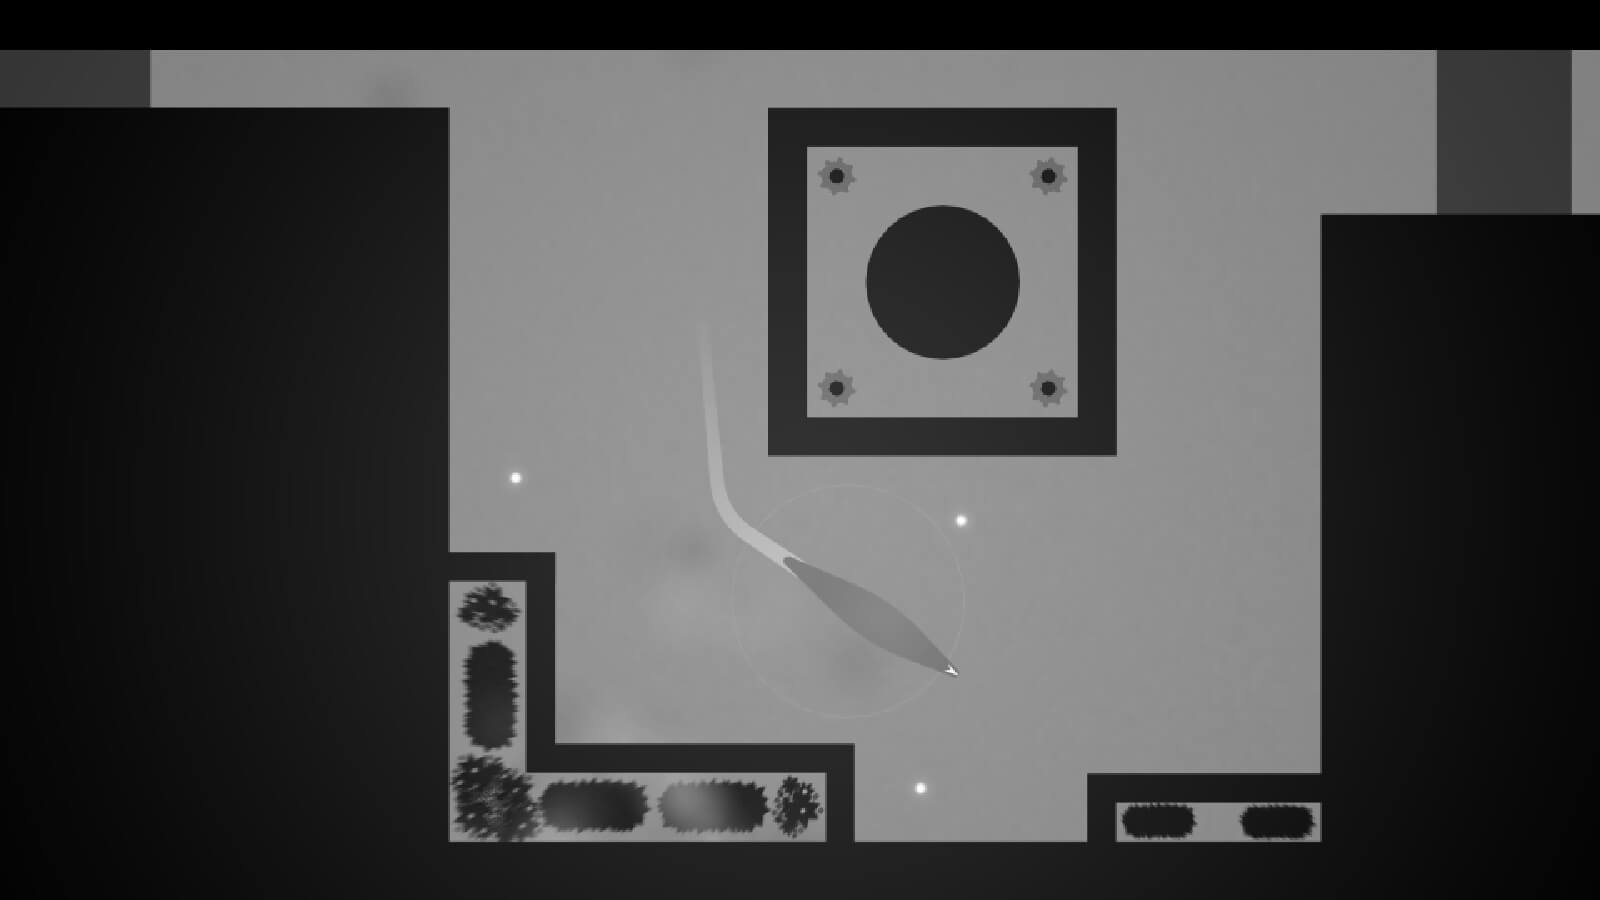 Seen from top down, a slug-like creature moves in an angular enclosed space all rendered in grayscale.